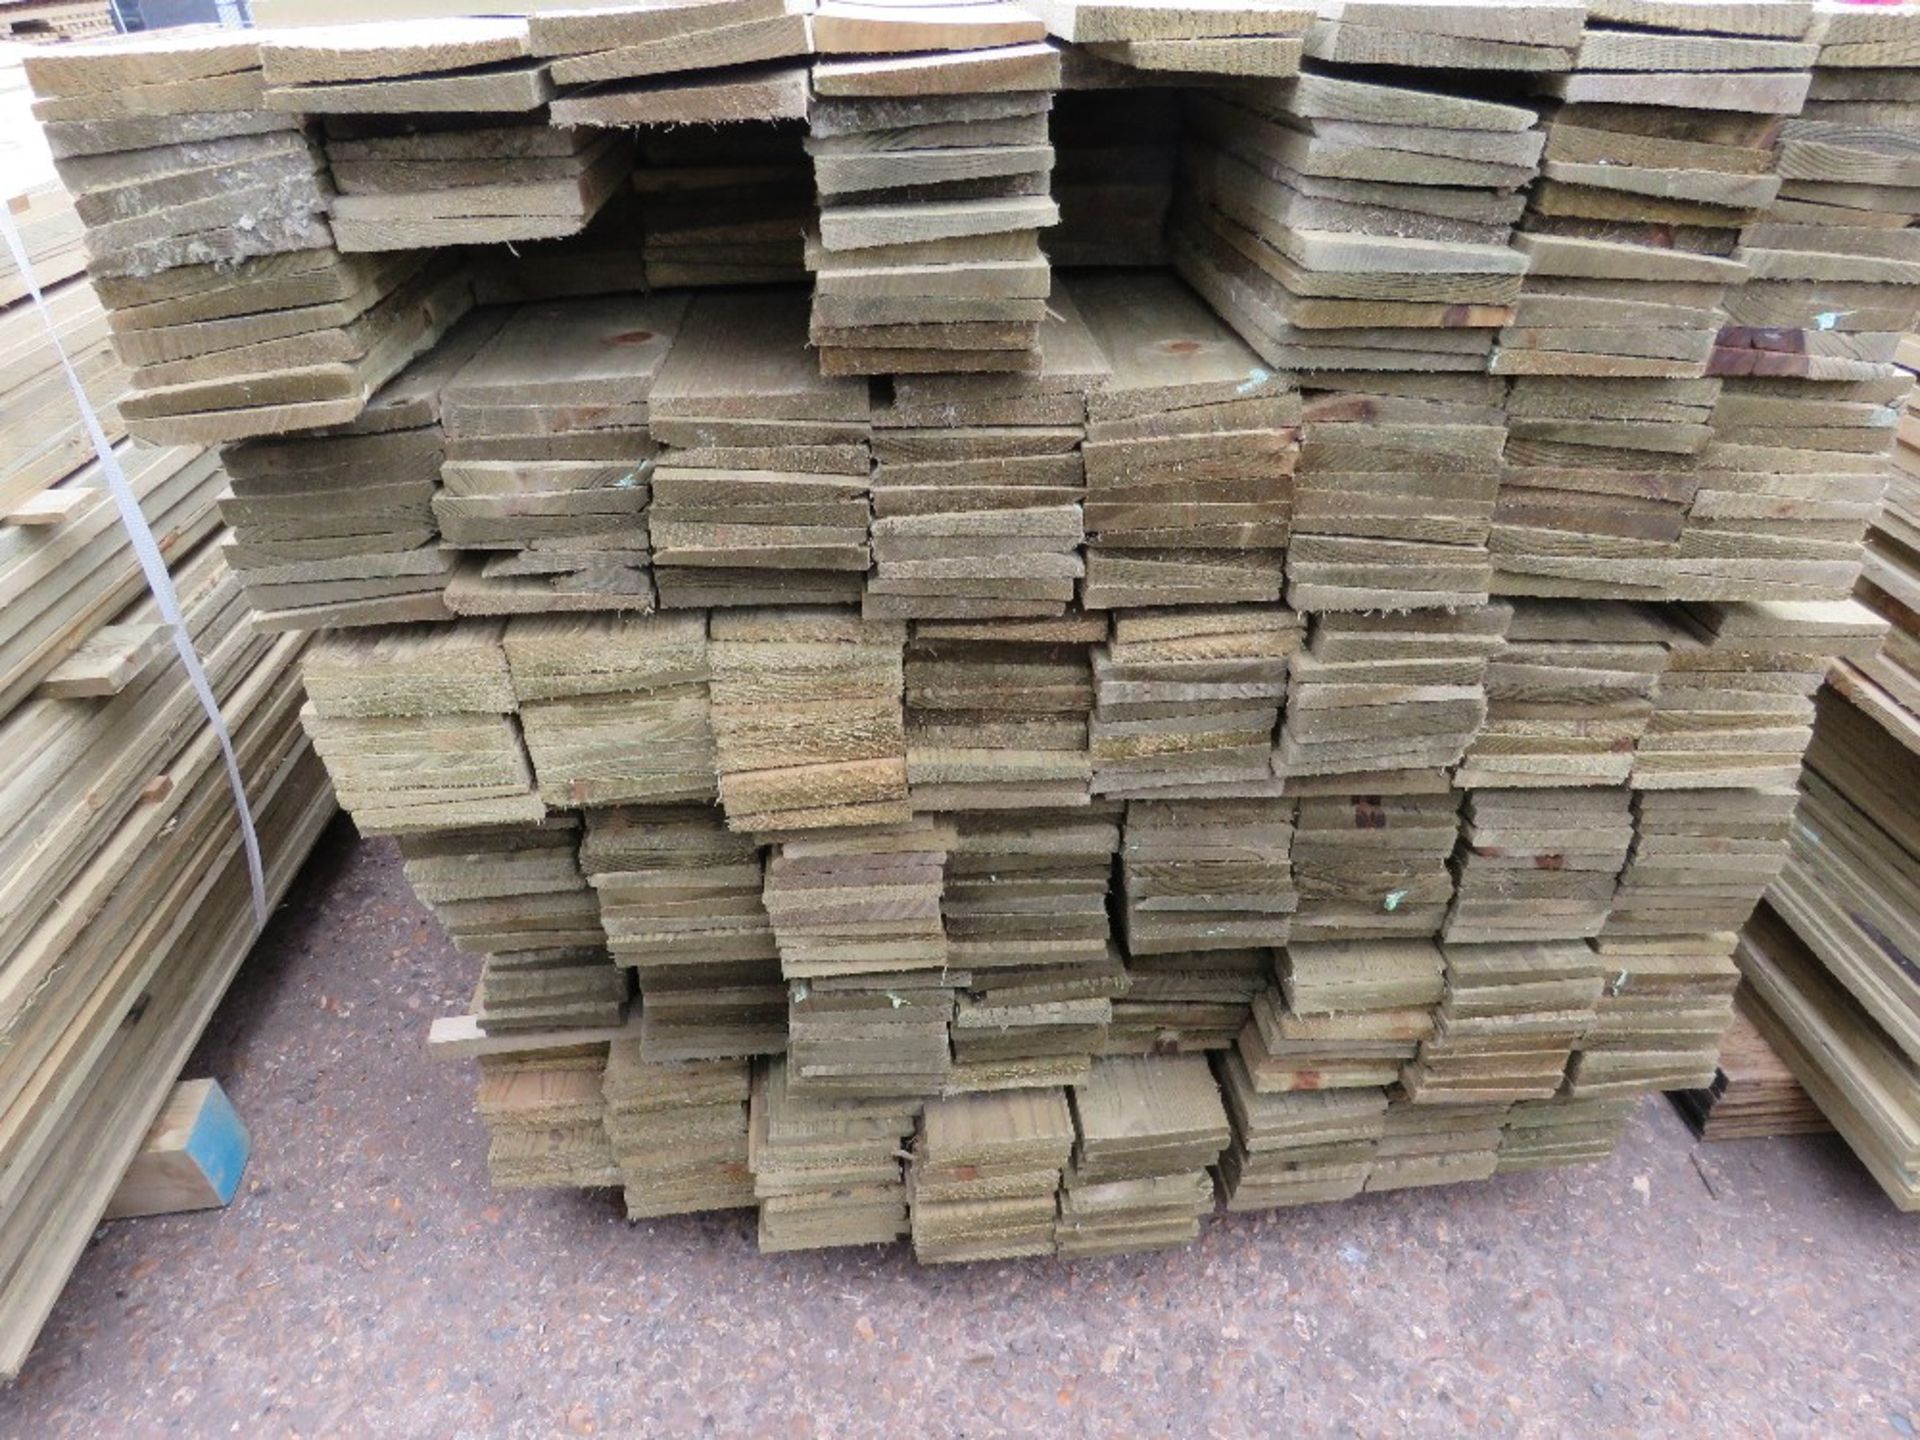 EXTRA LARGE PACK OF TREATED FEATHER EDGE FENCE CLADDING TIMBER, 1.75M LENGTH X 10CM APPROX. - Image 2 of 2